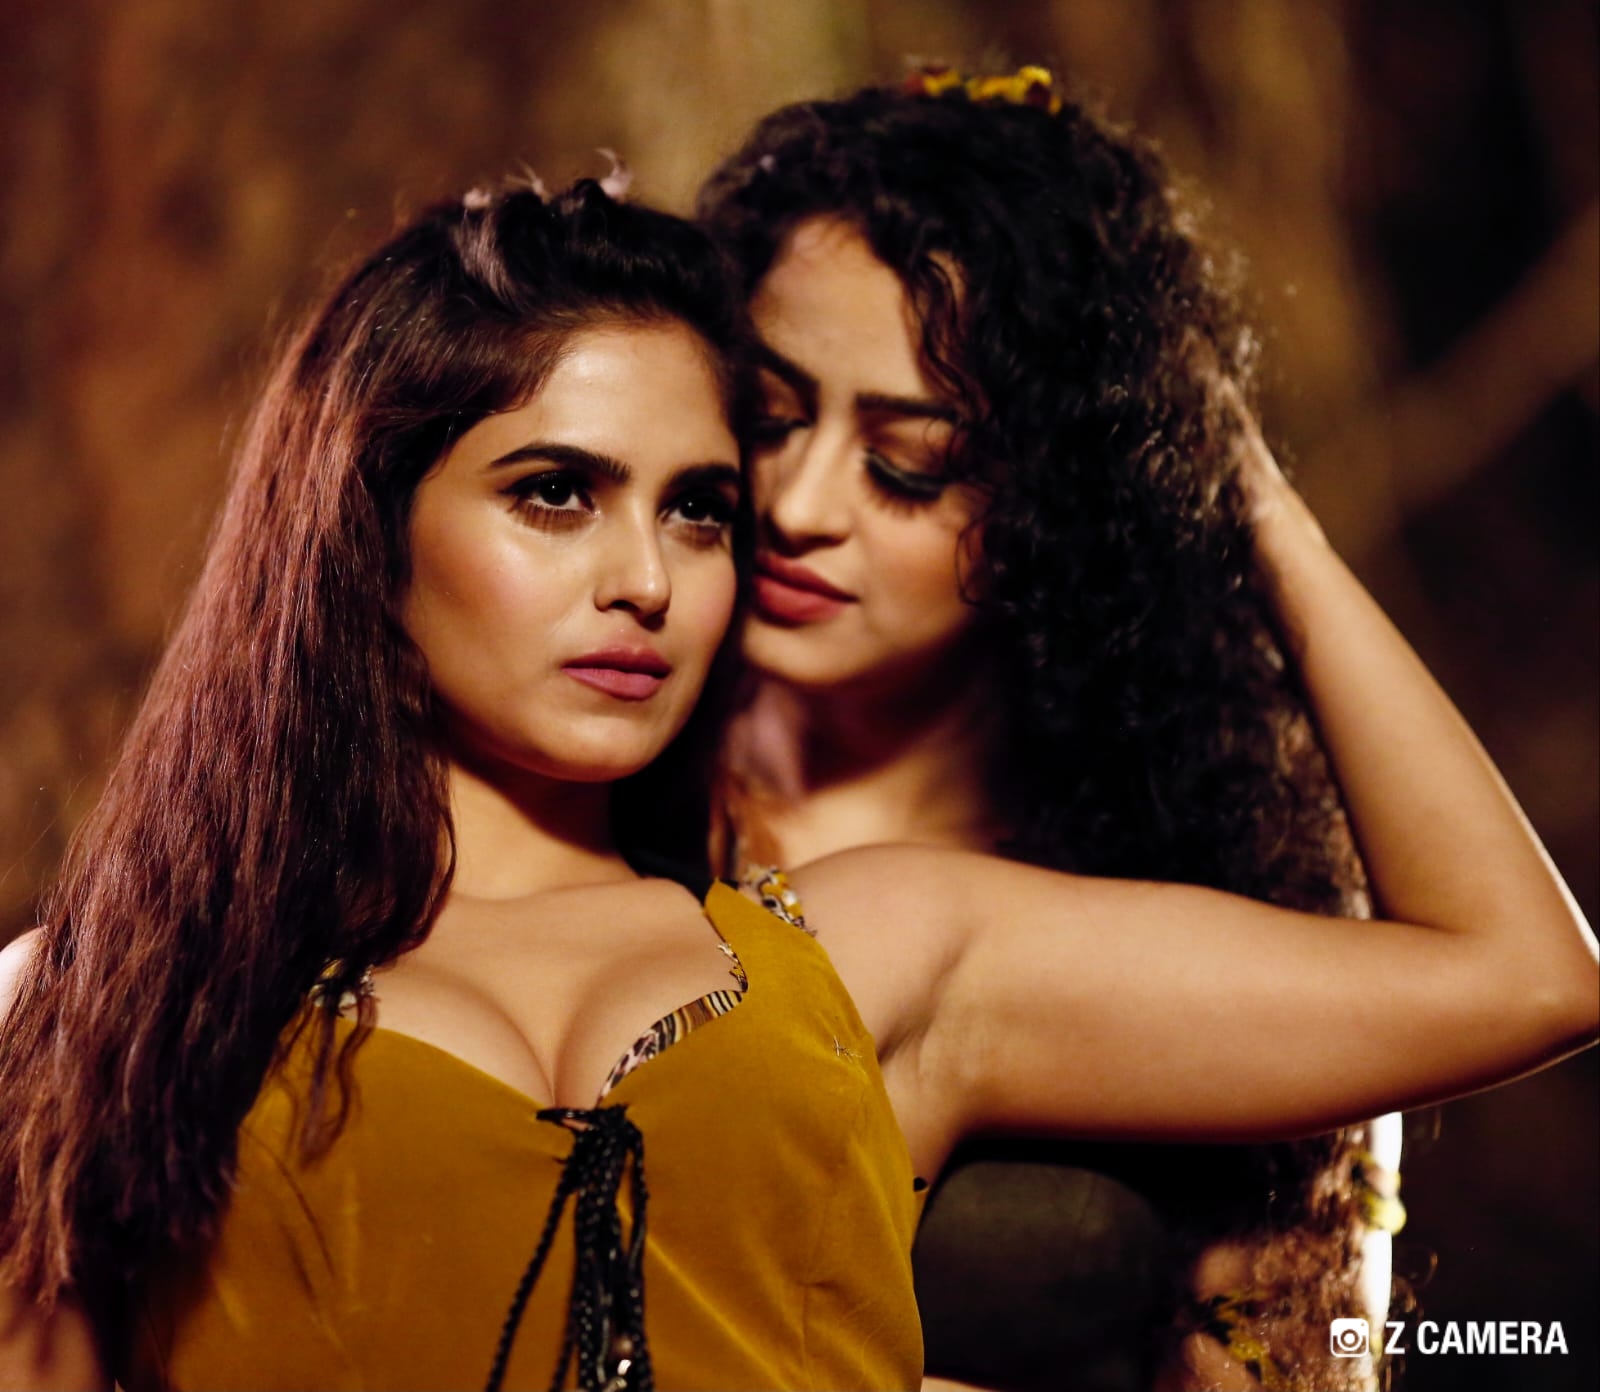 Director Ram Gopal Varma's most Controversial first lesbian film 'Khatra :Dangerous Is Ready For Release In Theaters After Being Cleared By the Censor Board!